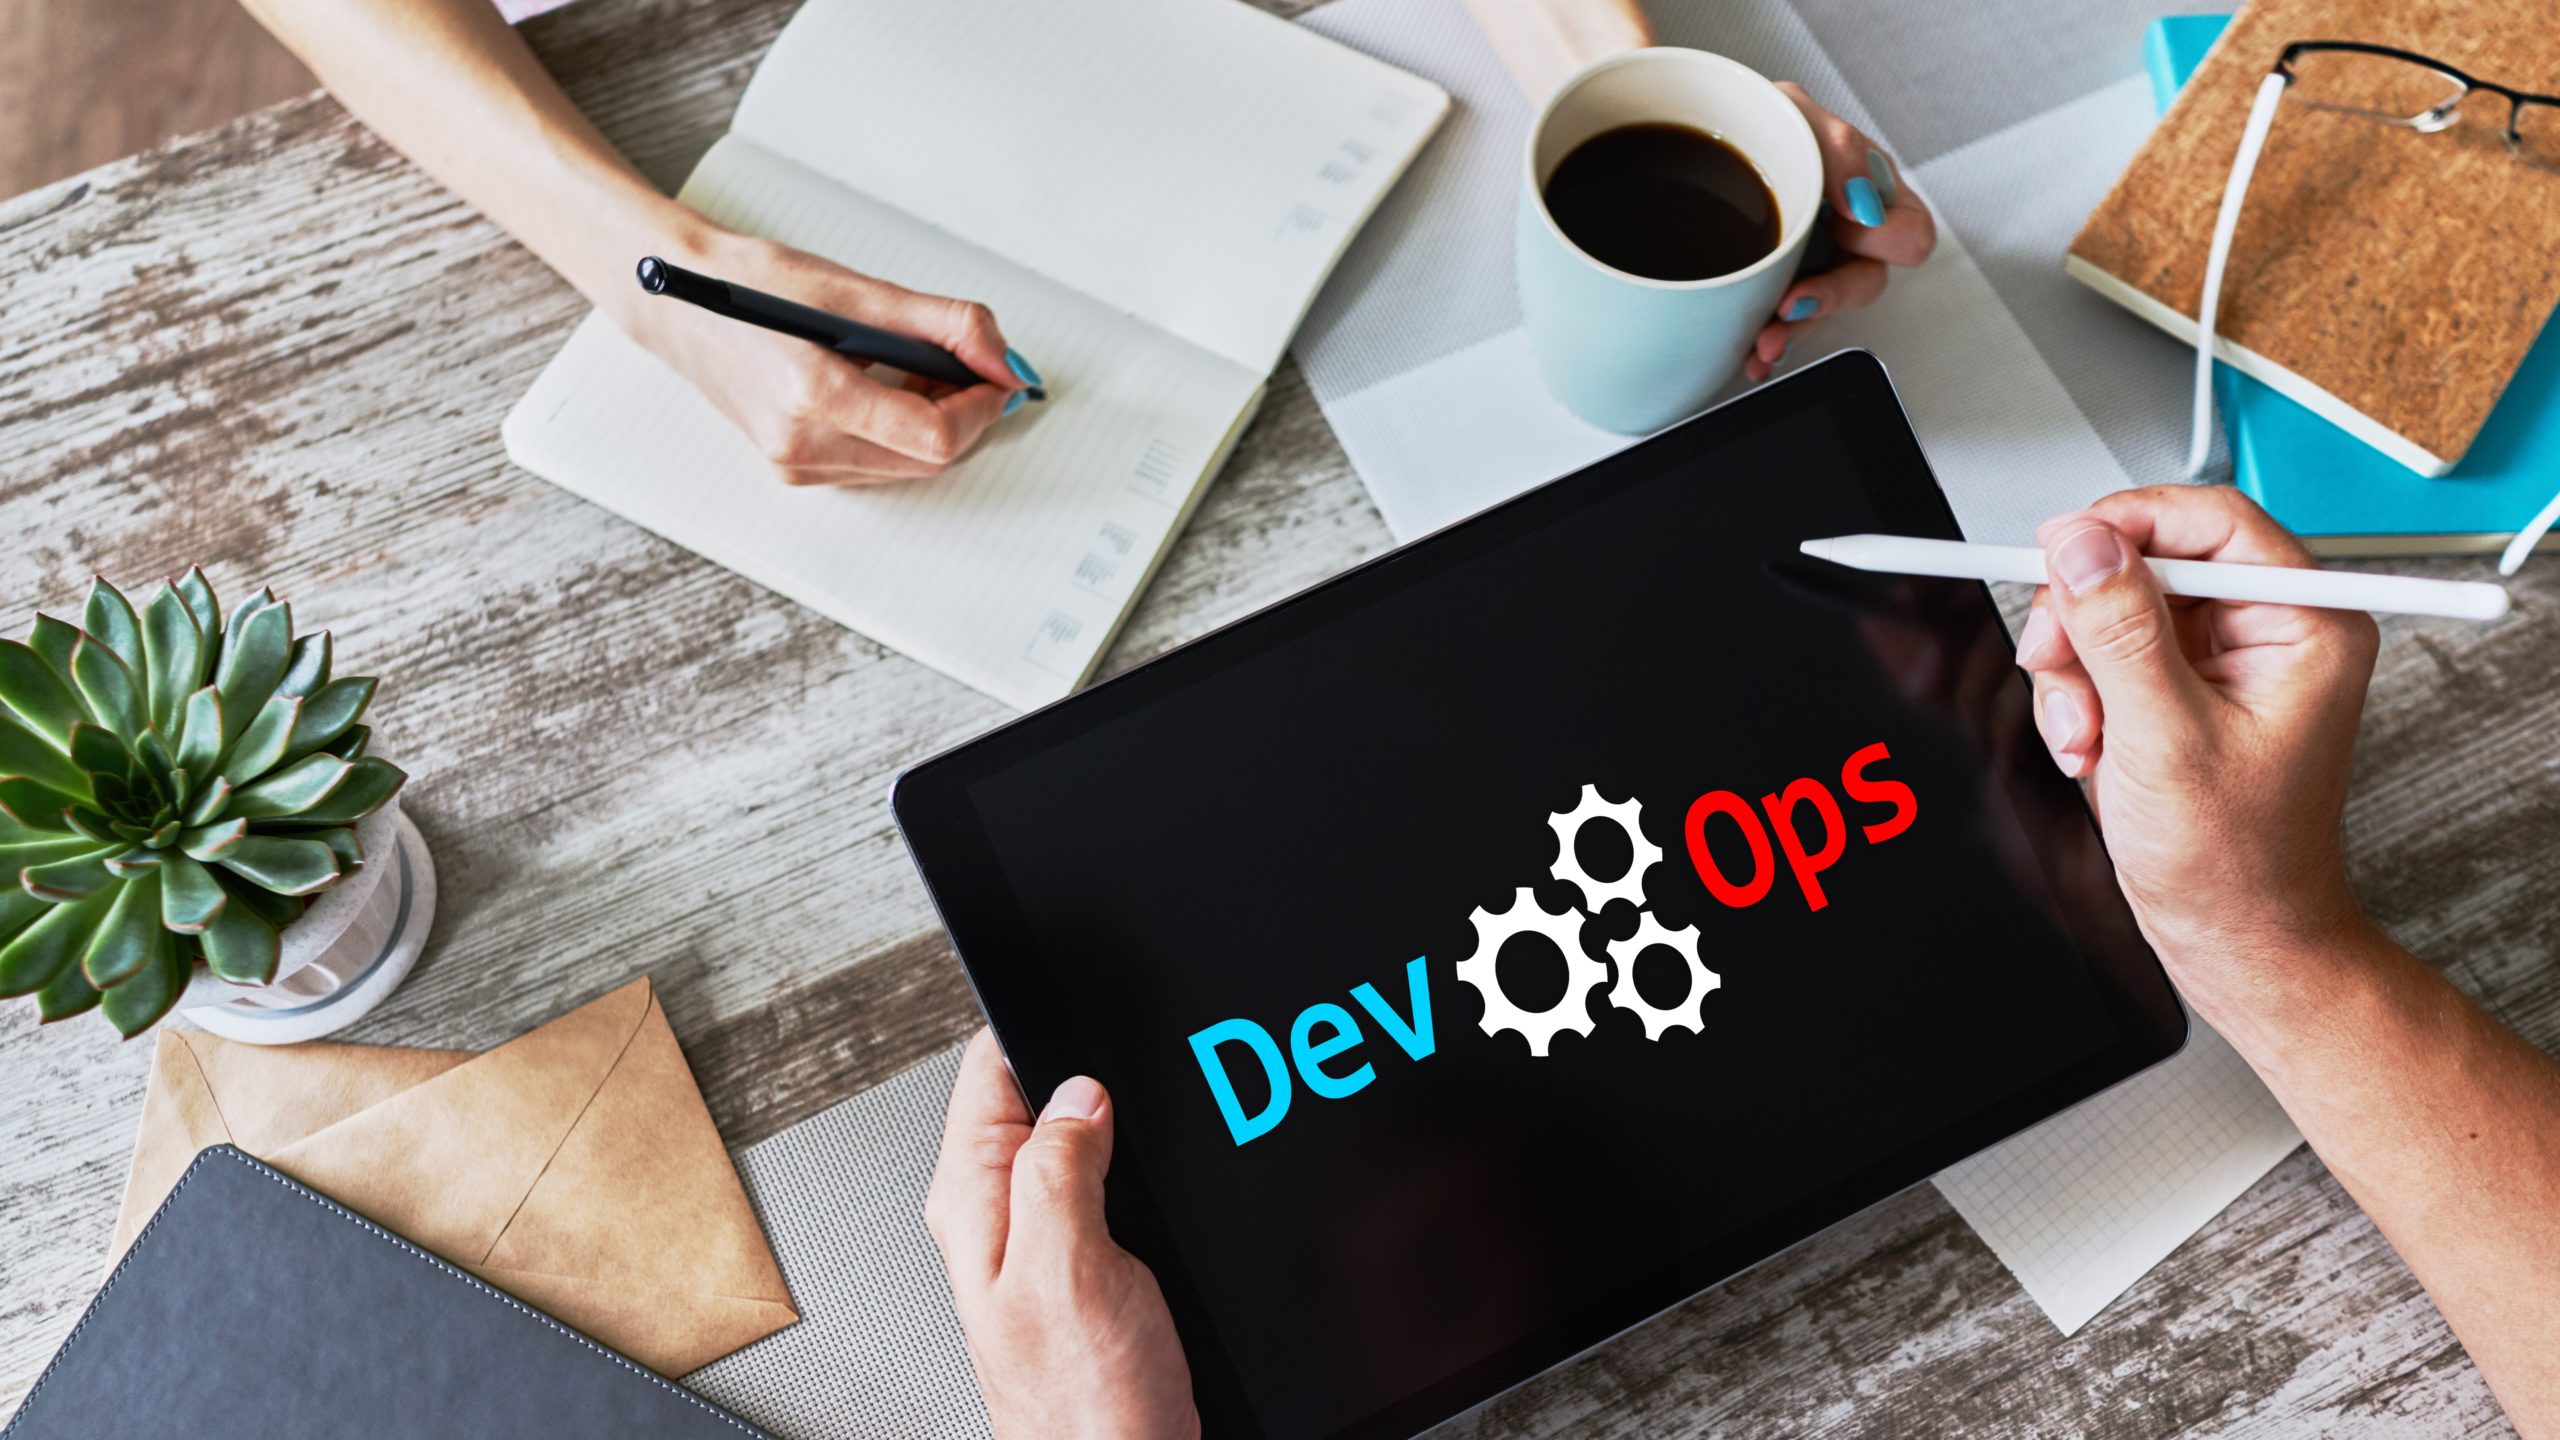 Lessons from the DevOps shop floor